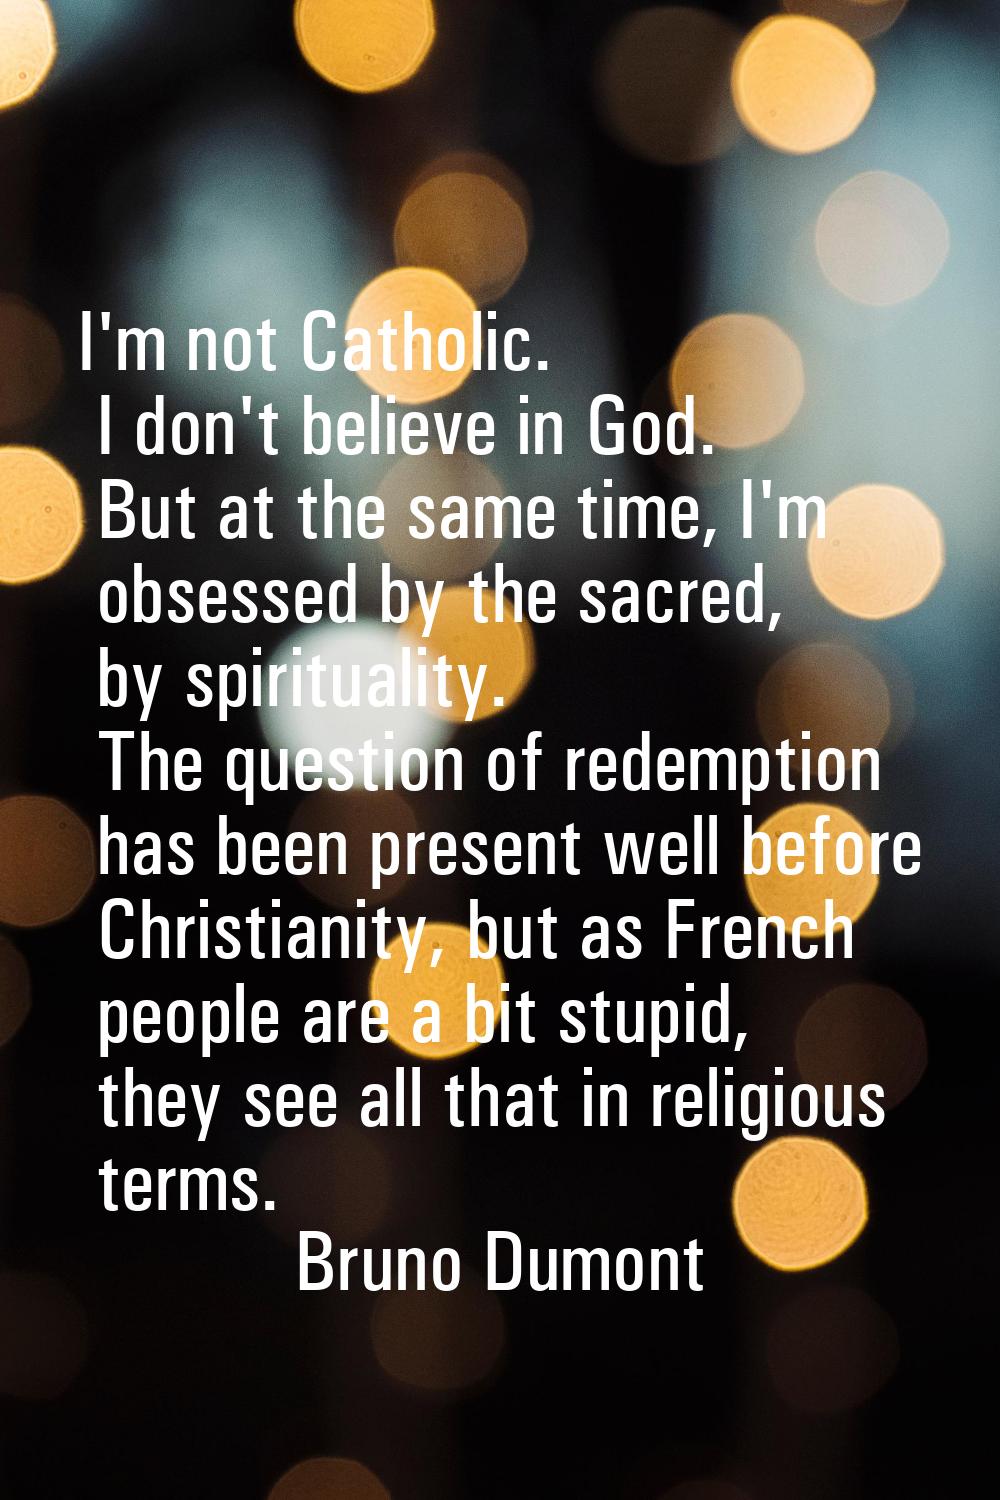 I'm not Catholic. I don't believe in God. But at the same time, I'm obsessed by the sacred, by spir